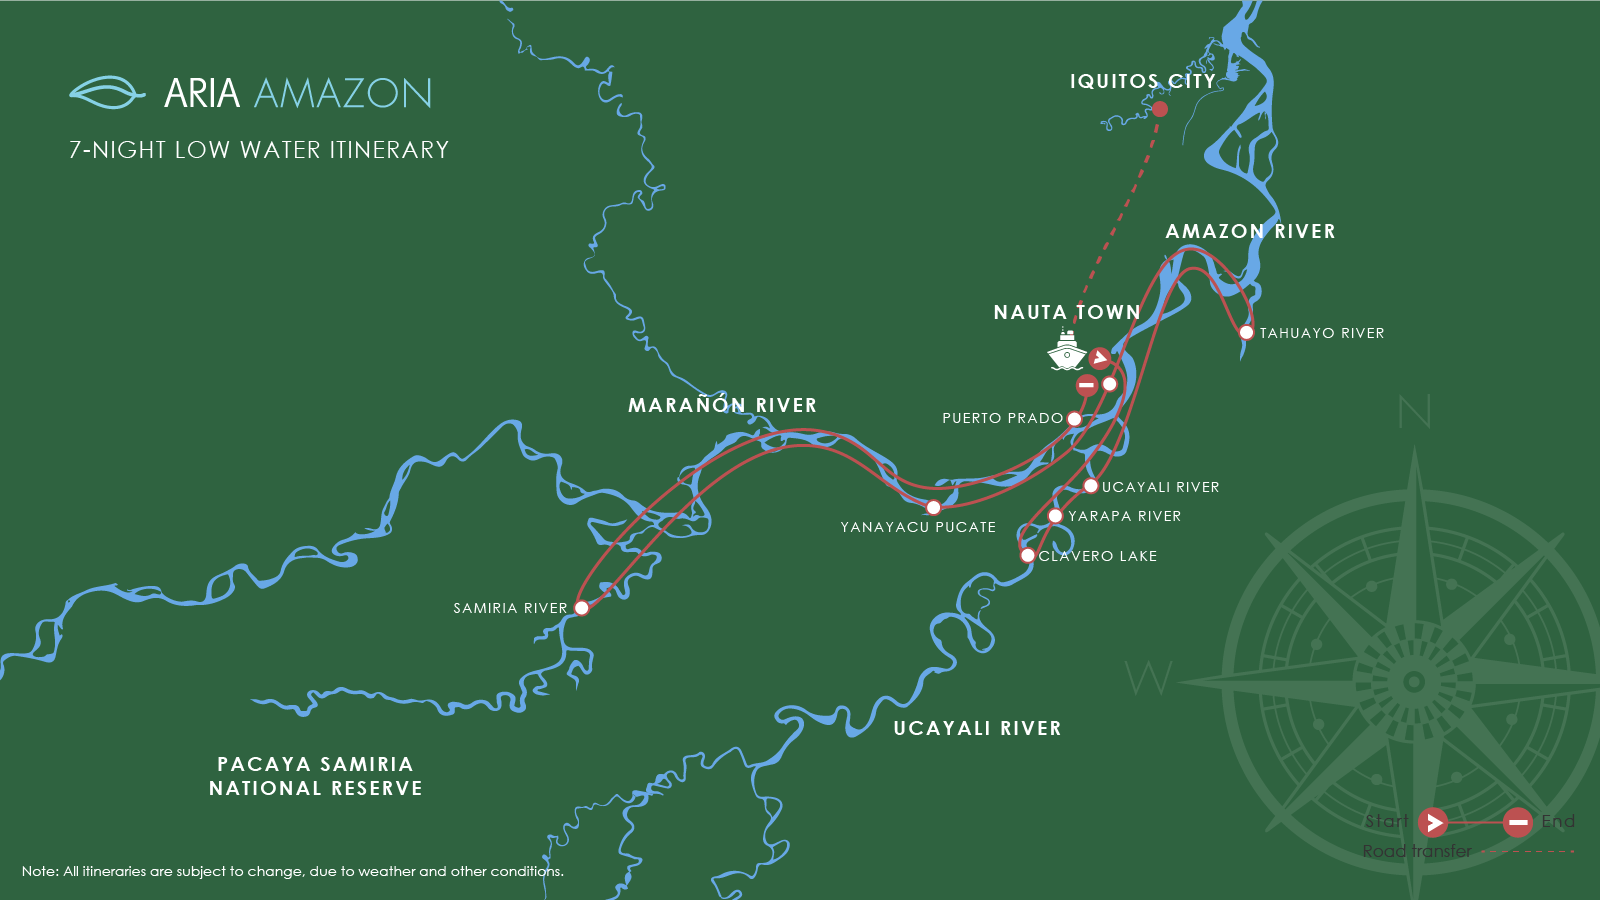 Route map of Aria Amazon River Cruise 8-day low-water itinerary, round-trip from Iquitos, Peru, sailing round-trip from Nauta with visits along the Amazon, Maranon & Ucayali rivers.